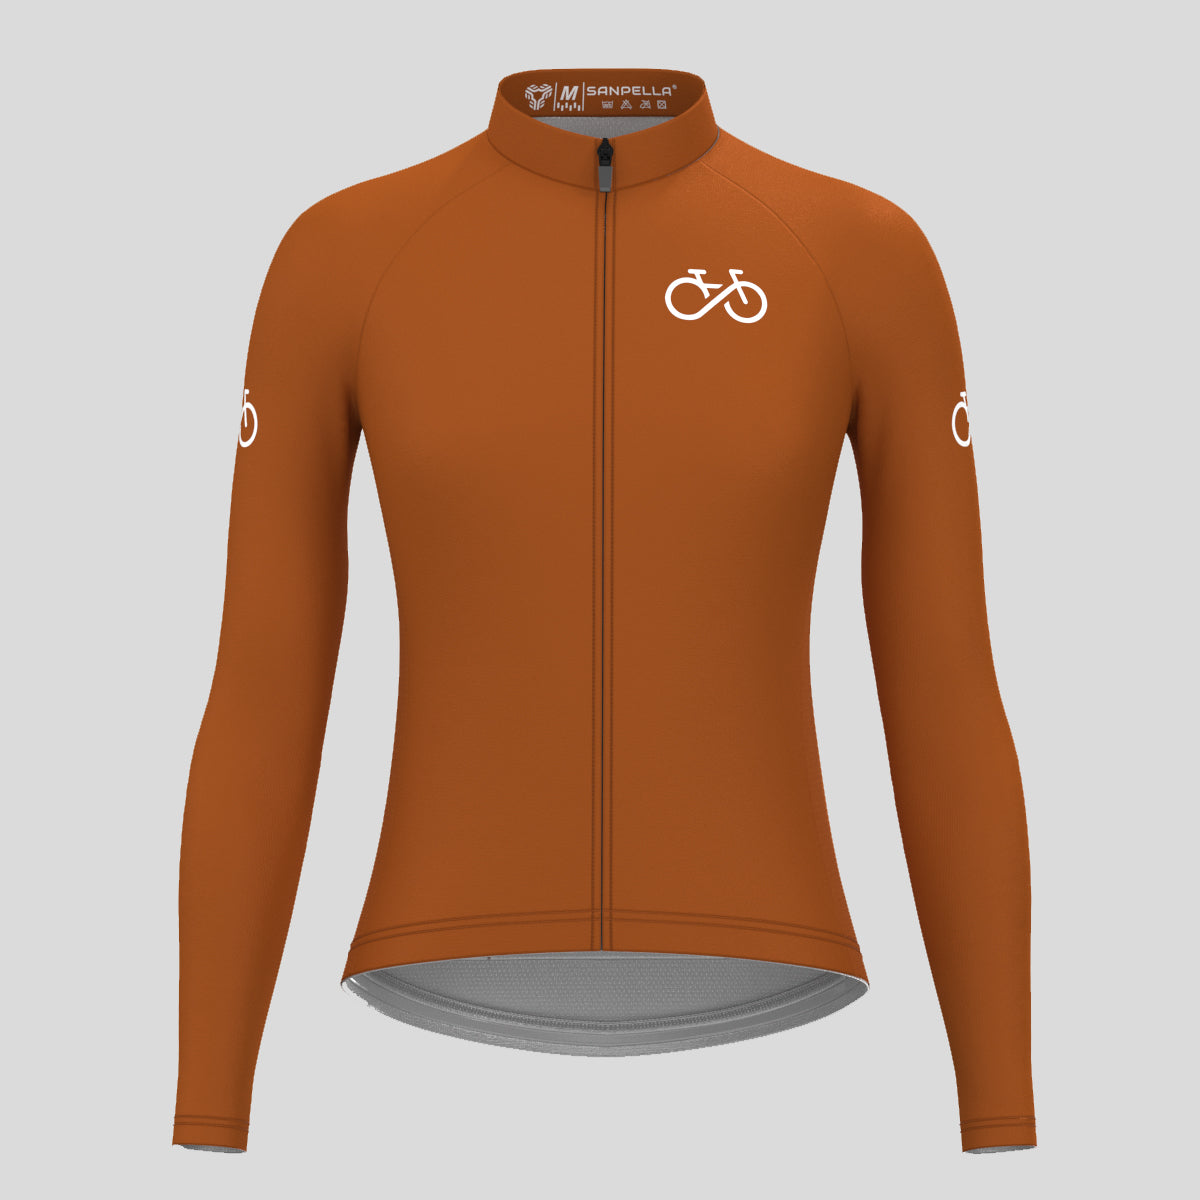 Ride Forever Women's LS Cycling Jersey - Caramel